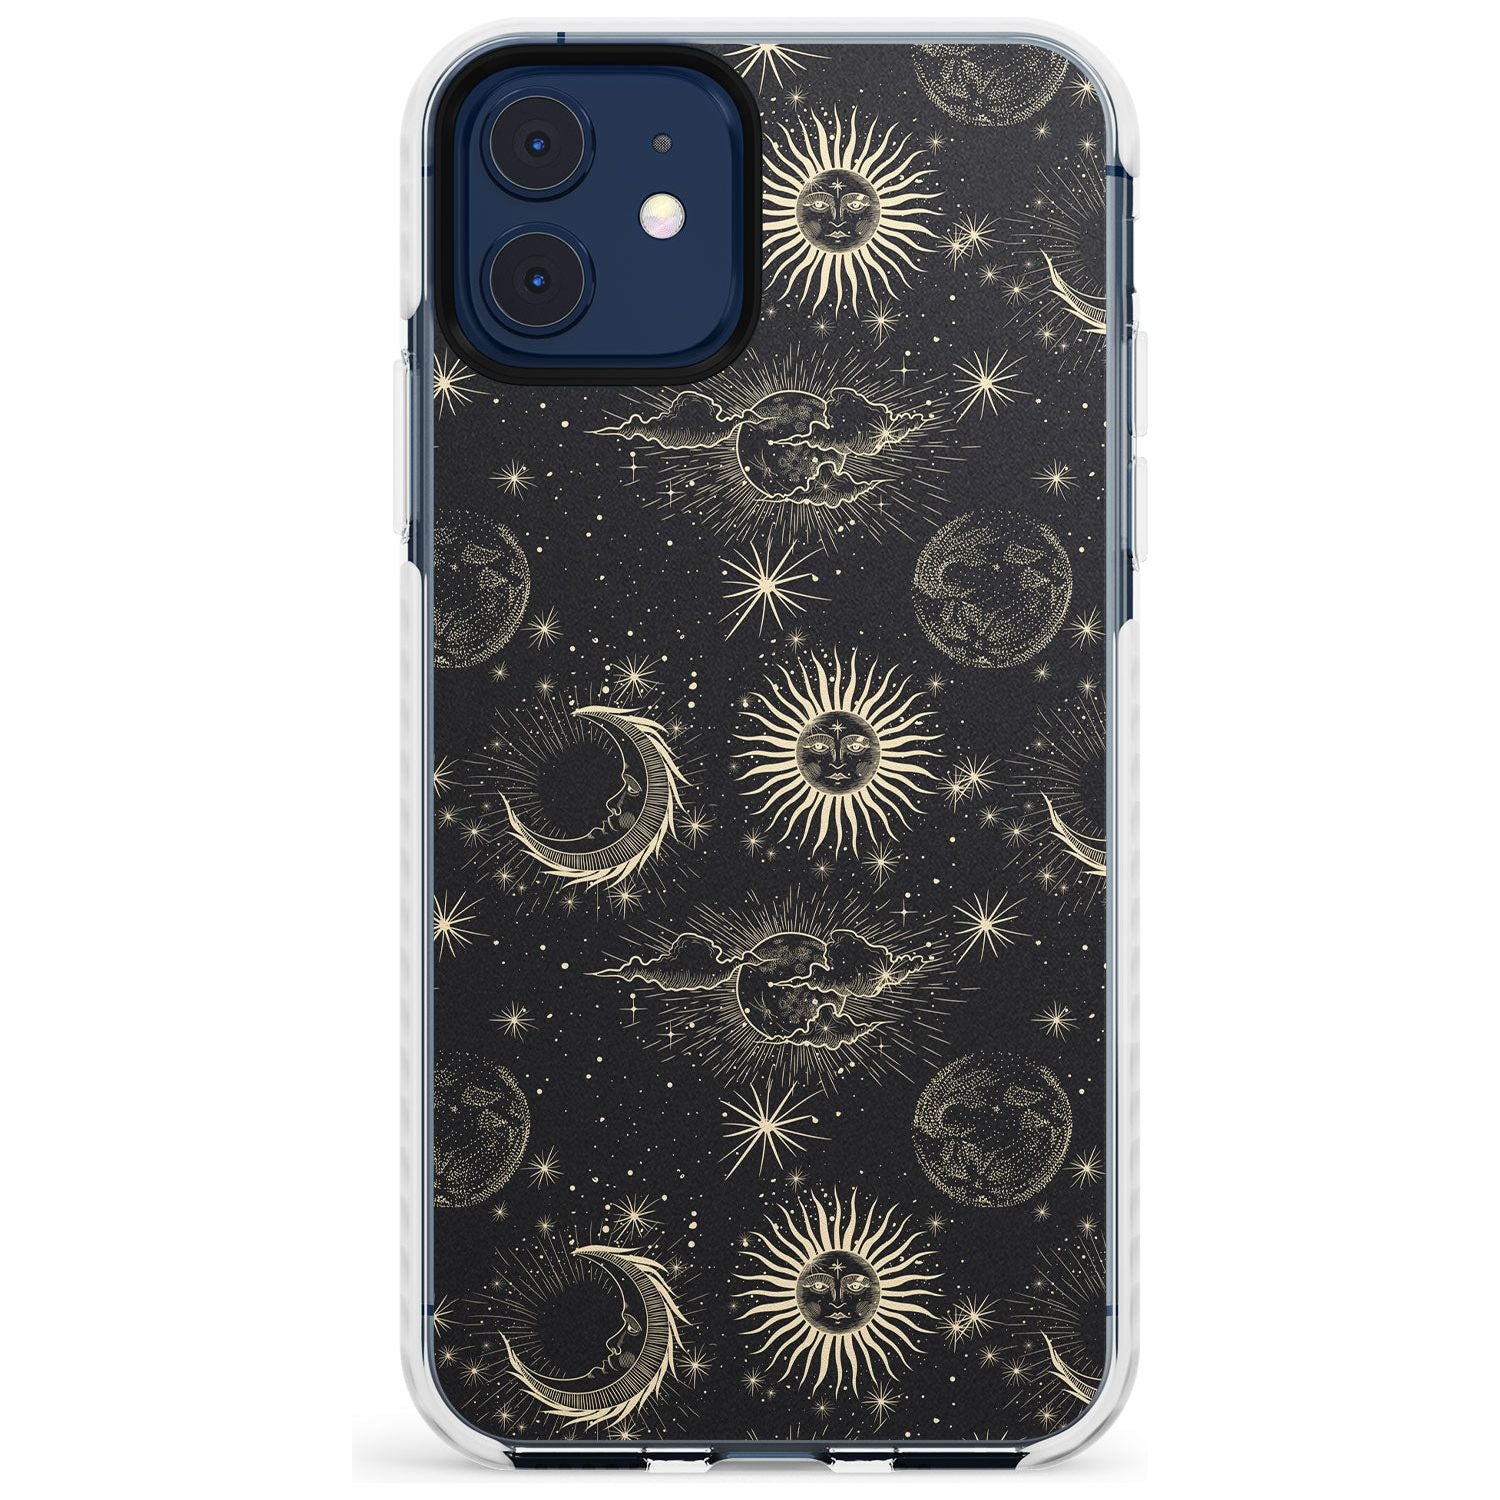 Large Suns, Moons & Clouds Slim TPU Phone Case for iPhone 11